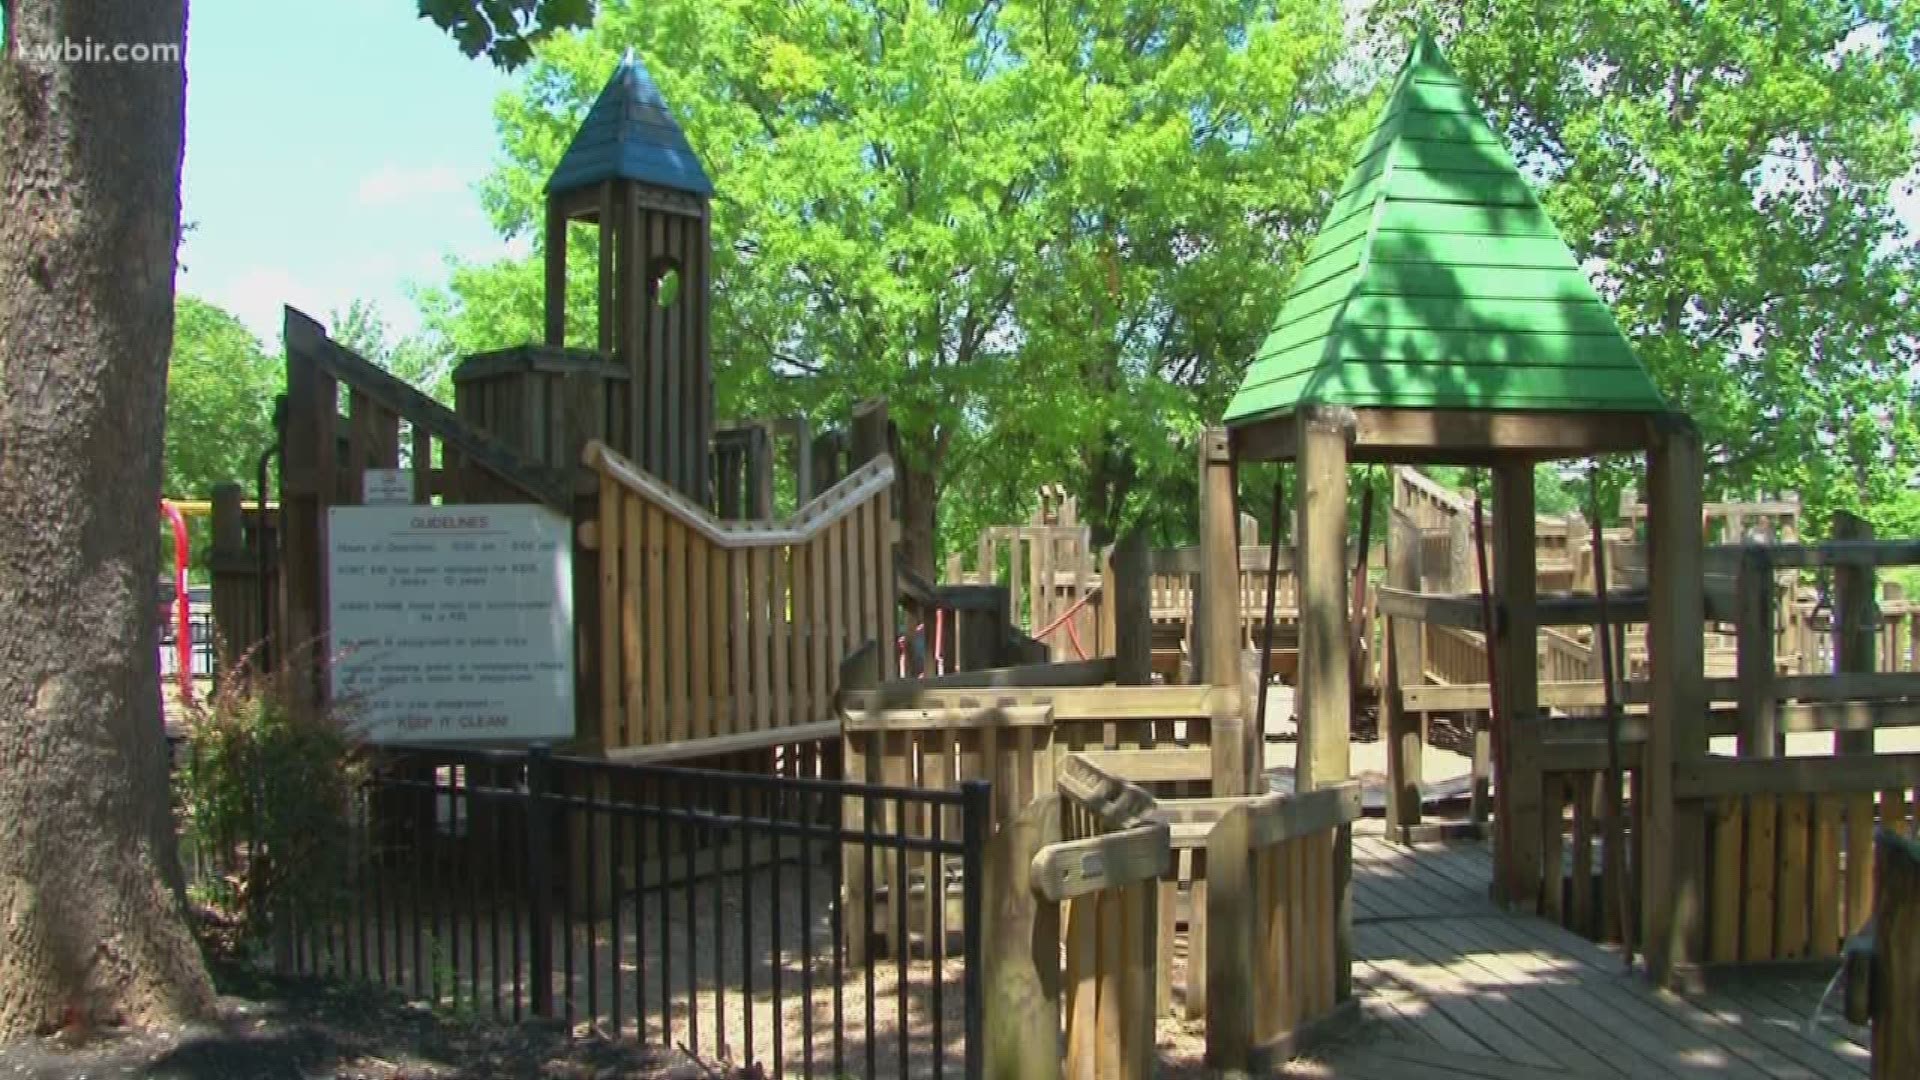 Knoxville city council recently authorized $300,000 to renovate Fort Kid. But a parent who helped build it says that renovation calls for demolishing the popular kids area, with no city funds to help rebuild.